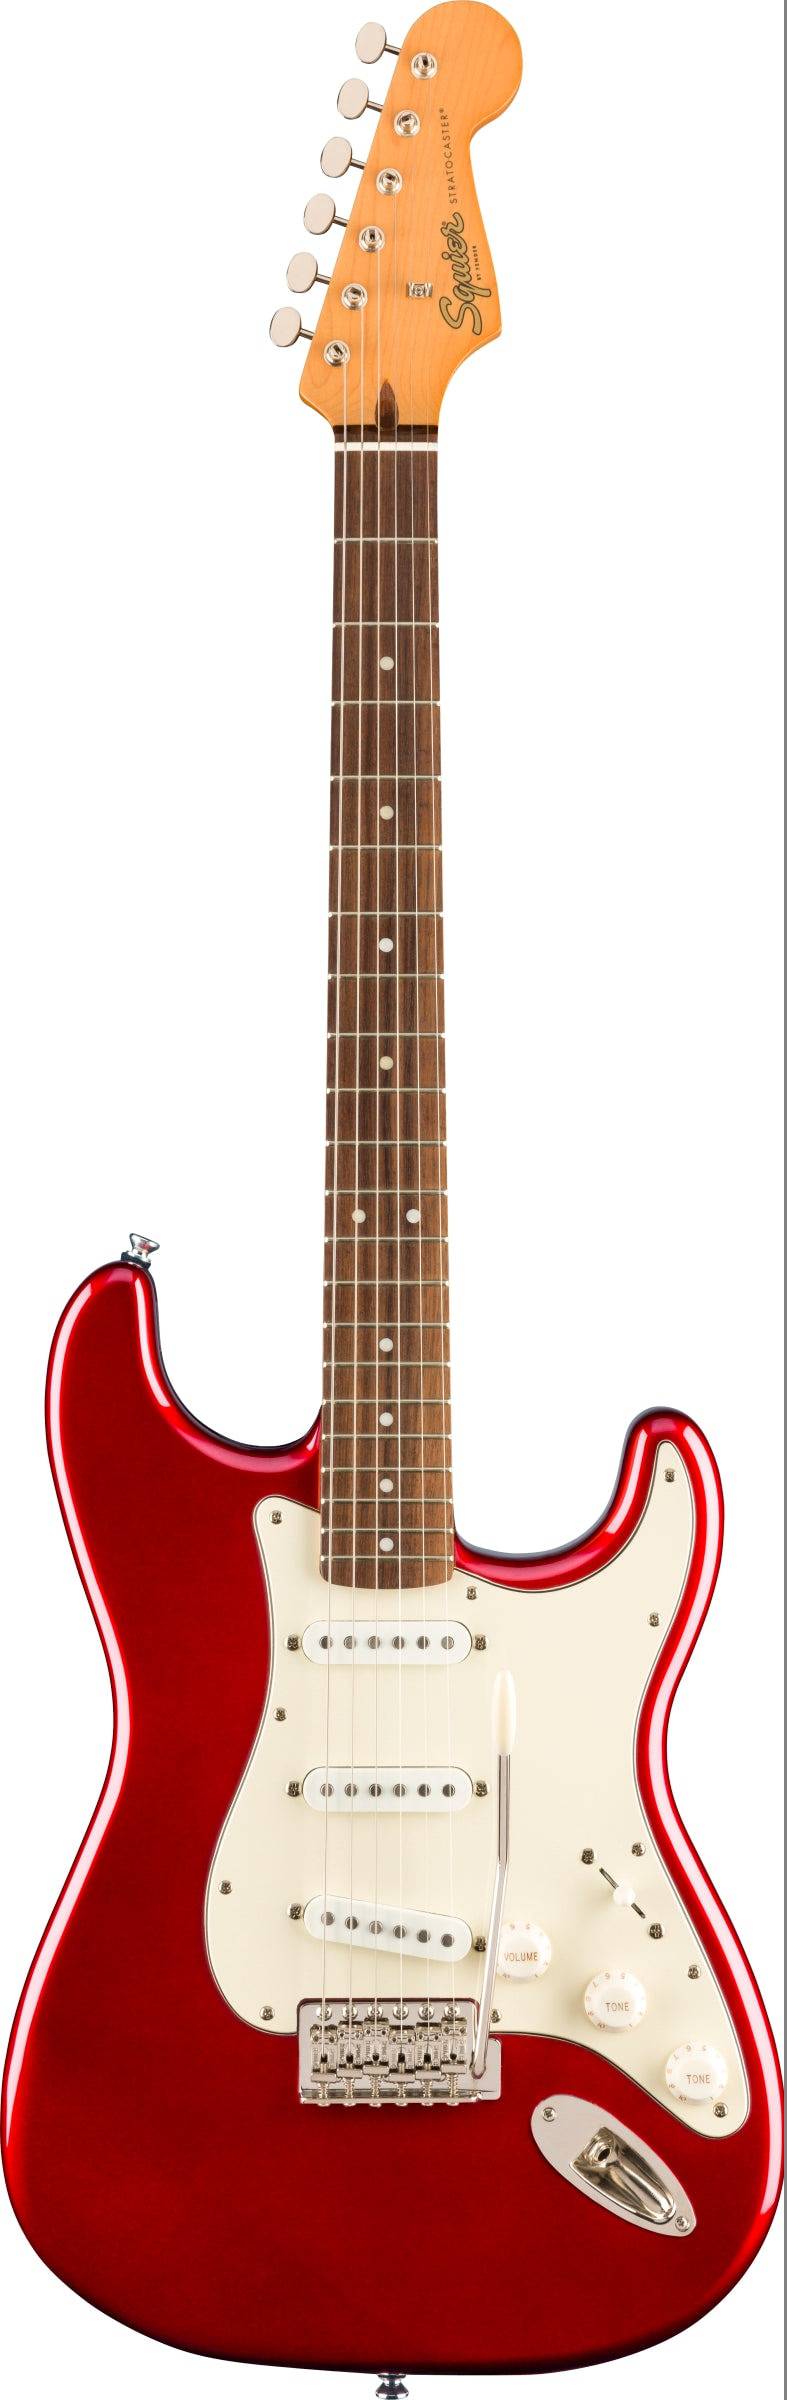 Squier Classic Vibe 60s Stratocaster Electric Guitar - Candy Apple Red - Joondalup Music Centre